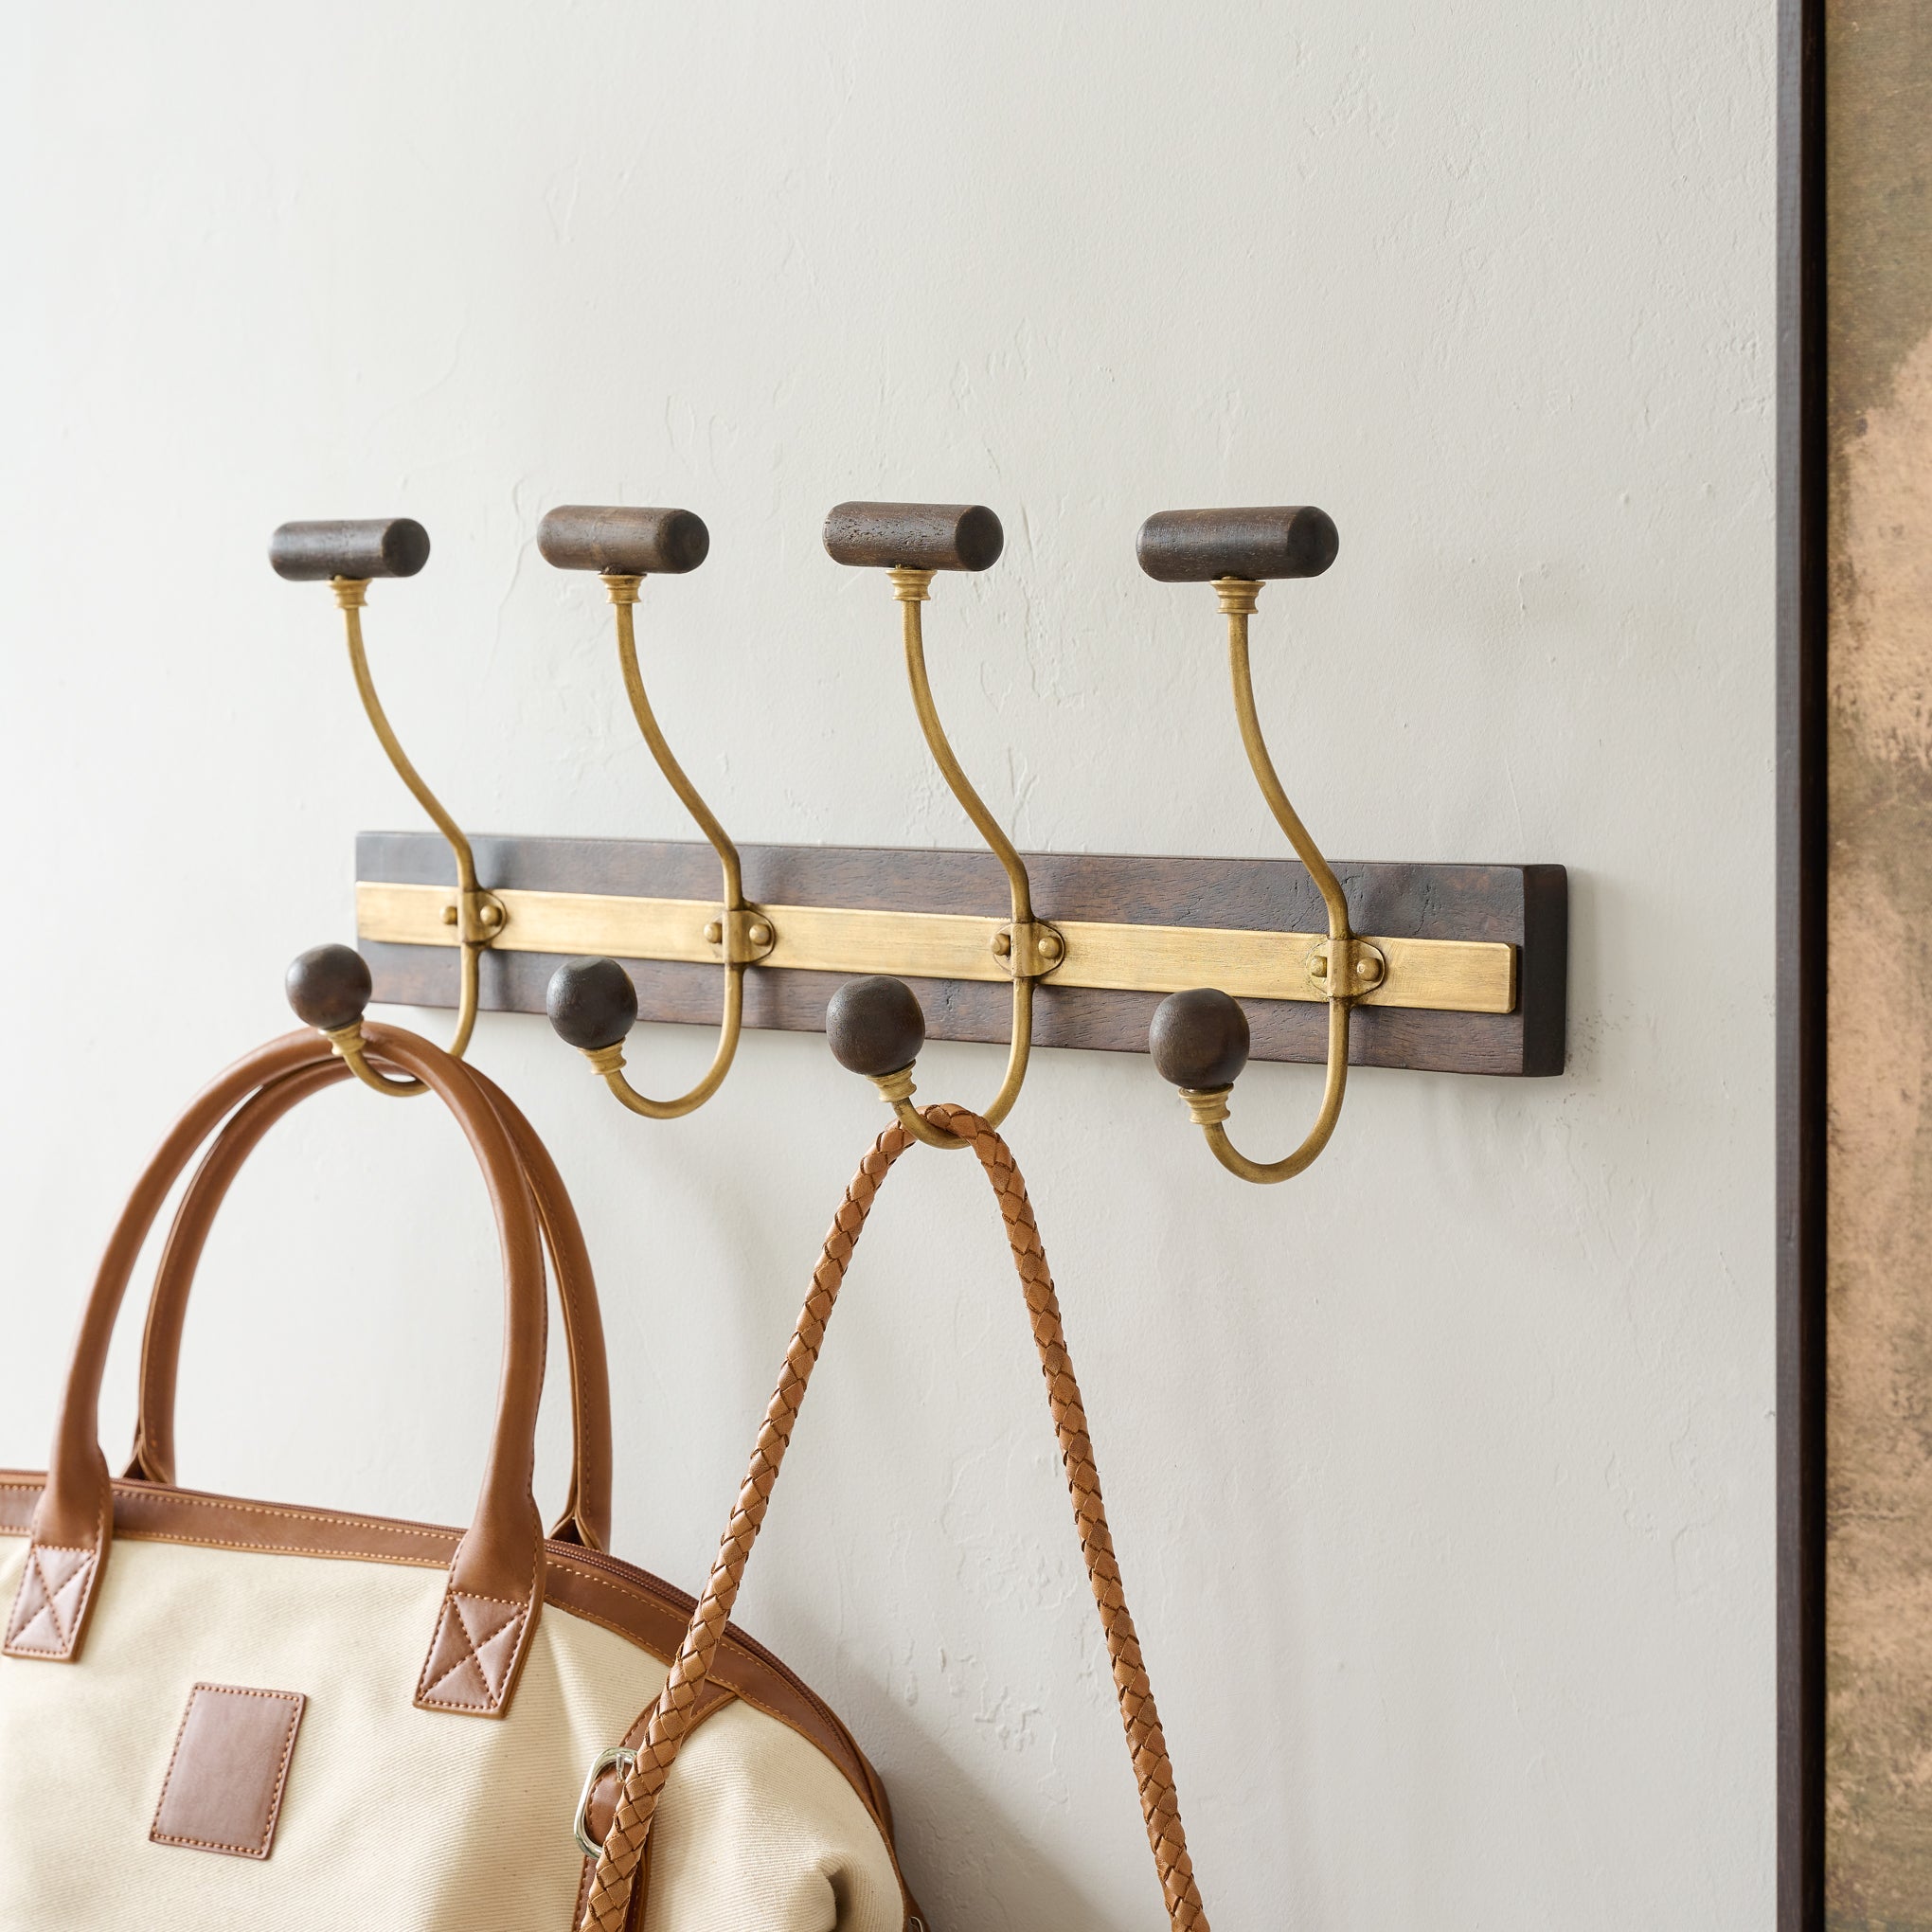 Grant Wood and Brass Hook Rack - large On sale for $34.80, discounted from $58.00